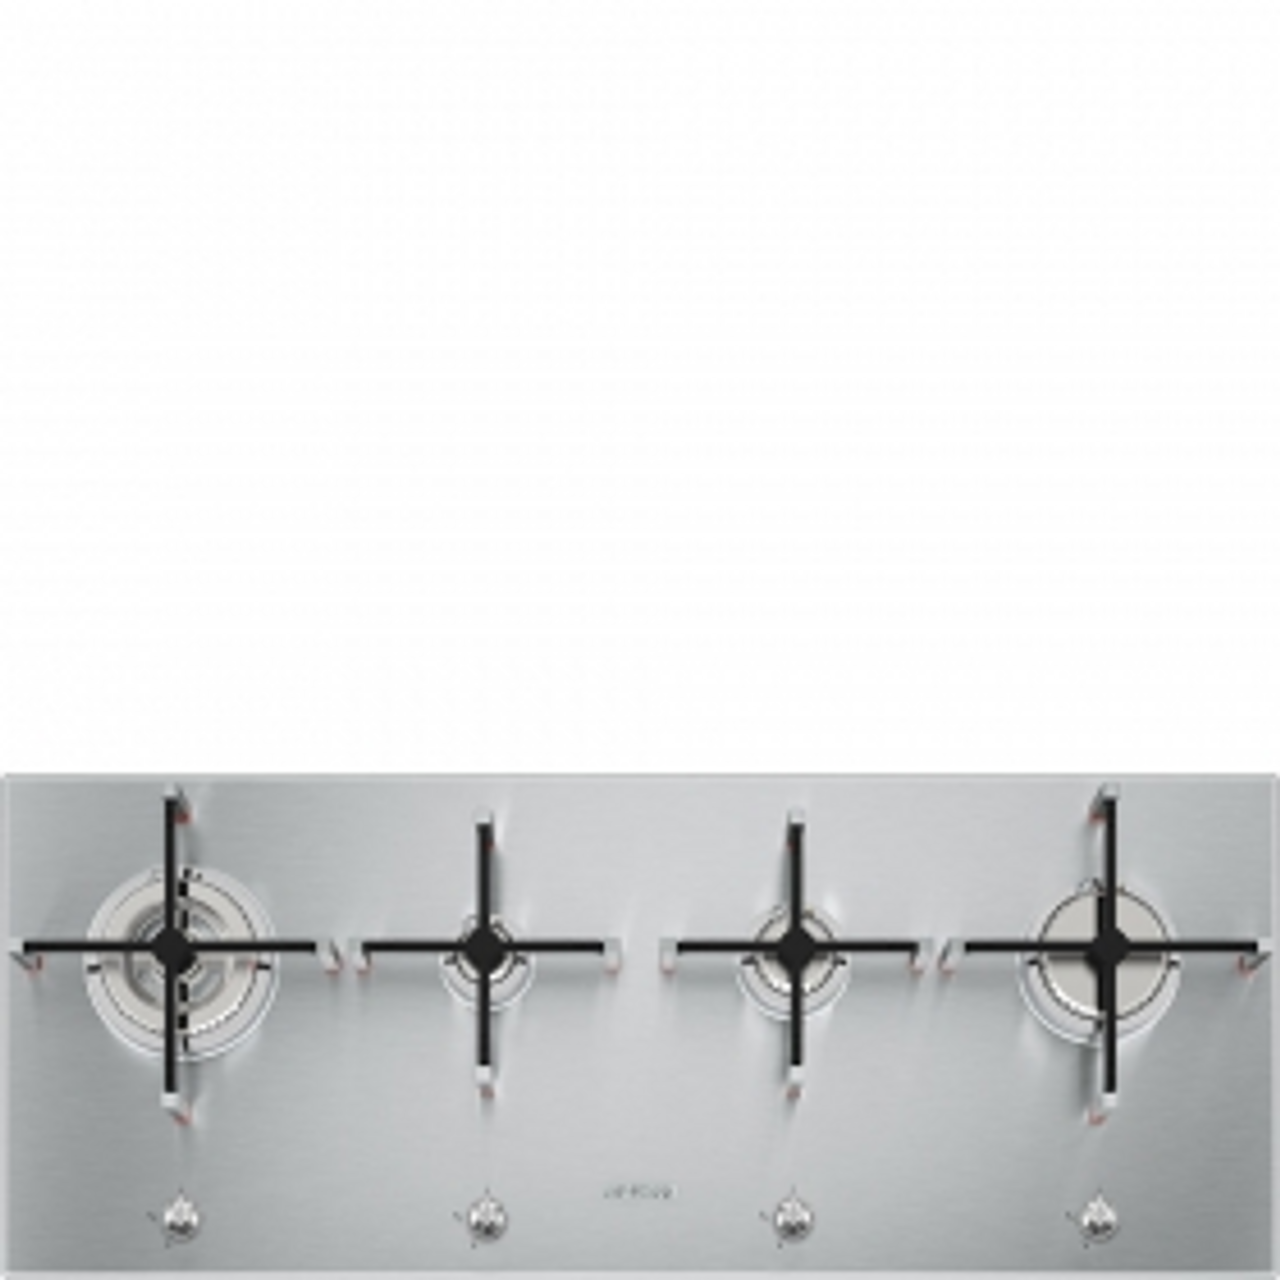 PX1402AU - 100cm Linea 4 Burner Gas Cooktop With Wok Burner - Stainless Steel